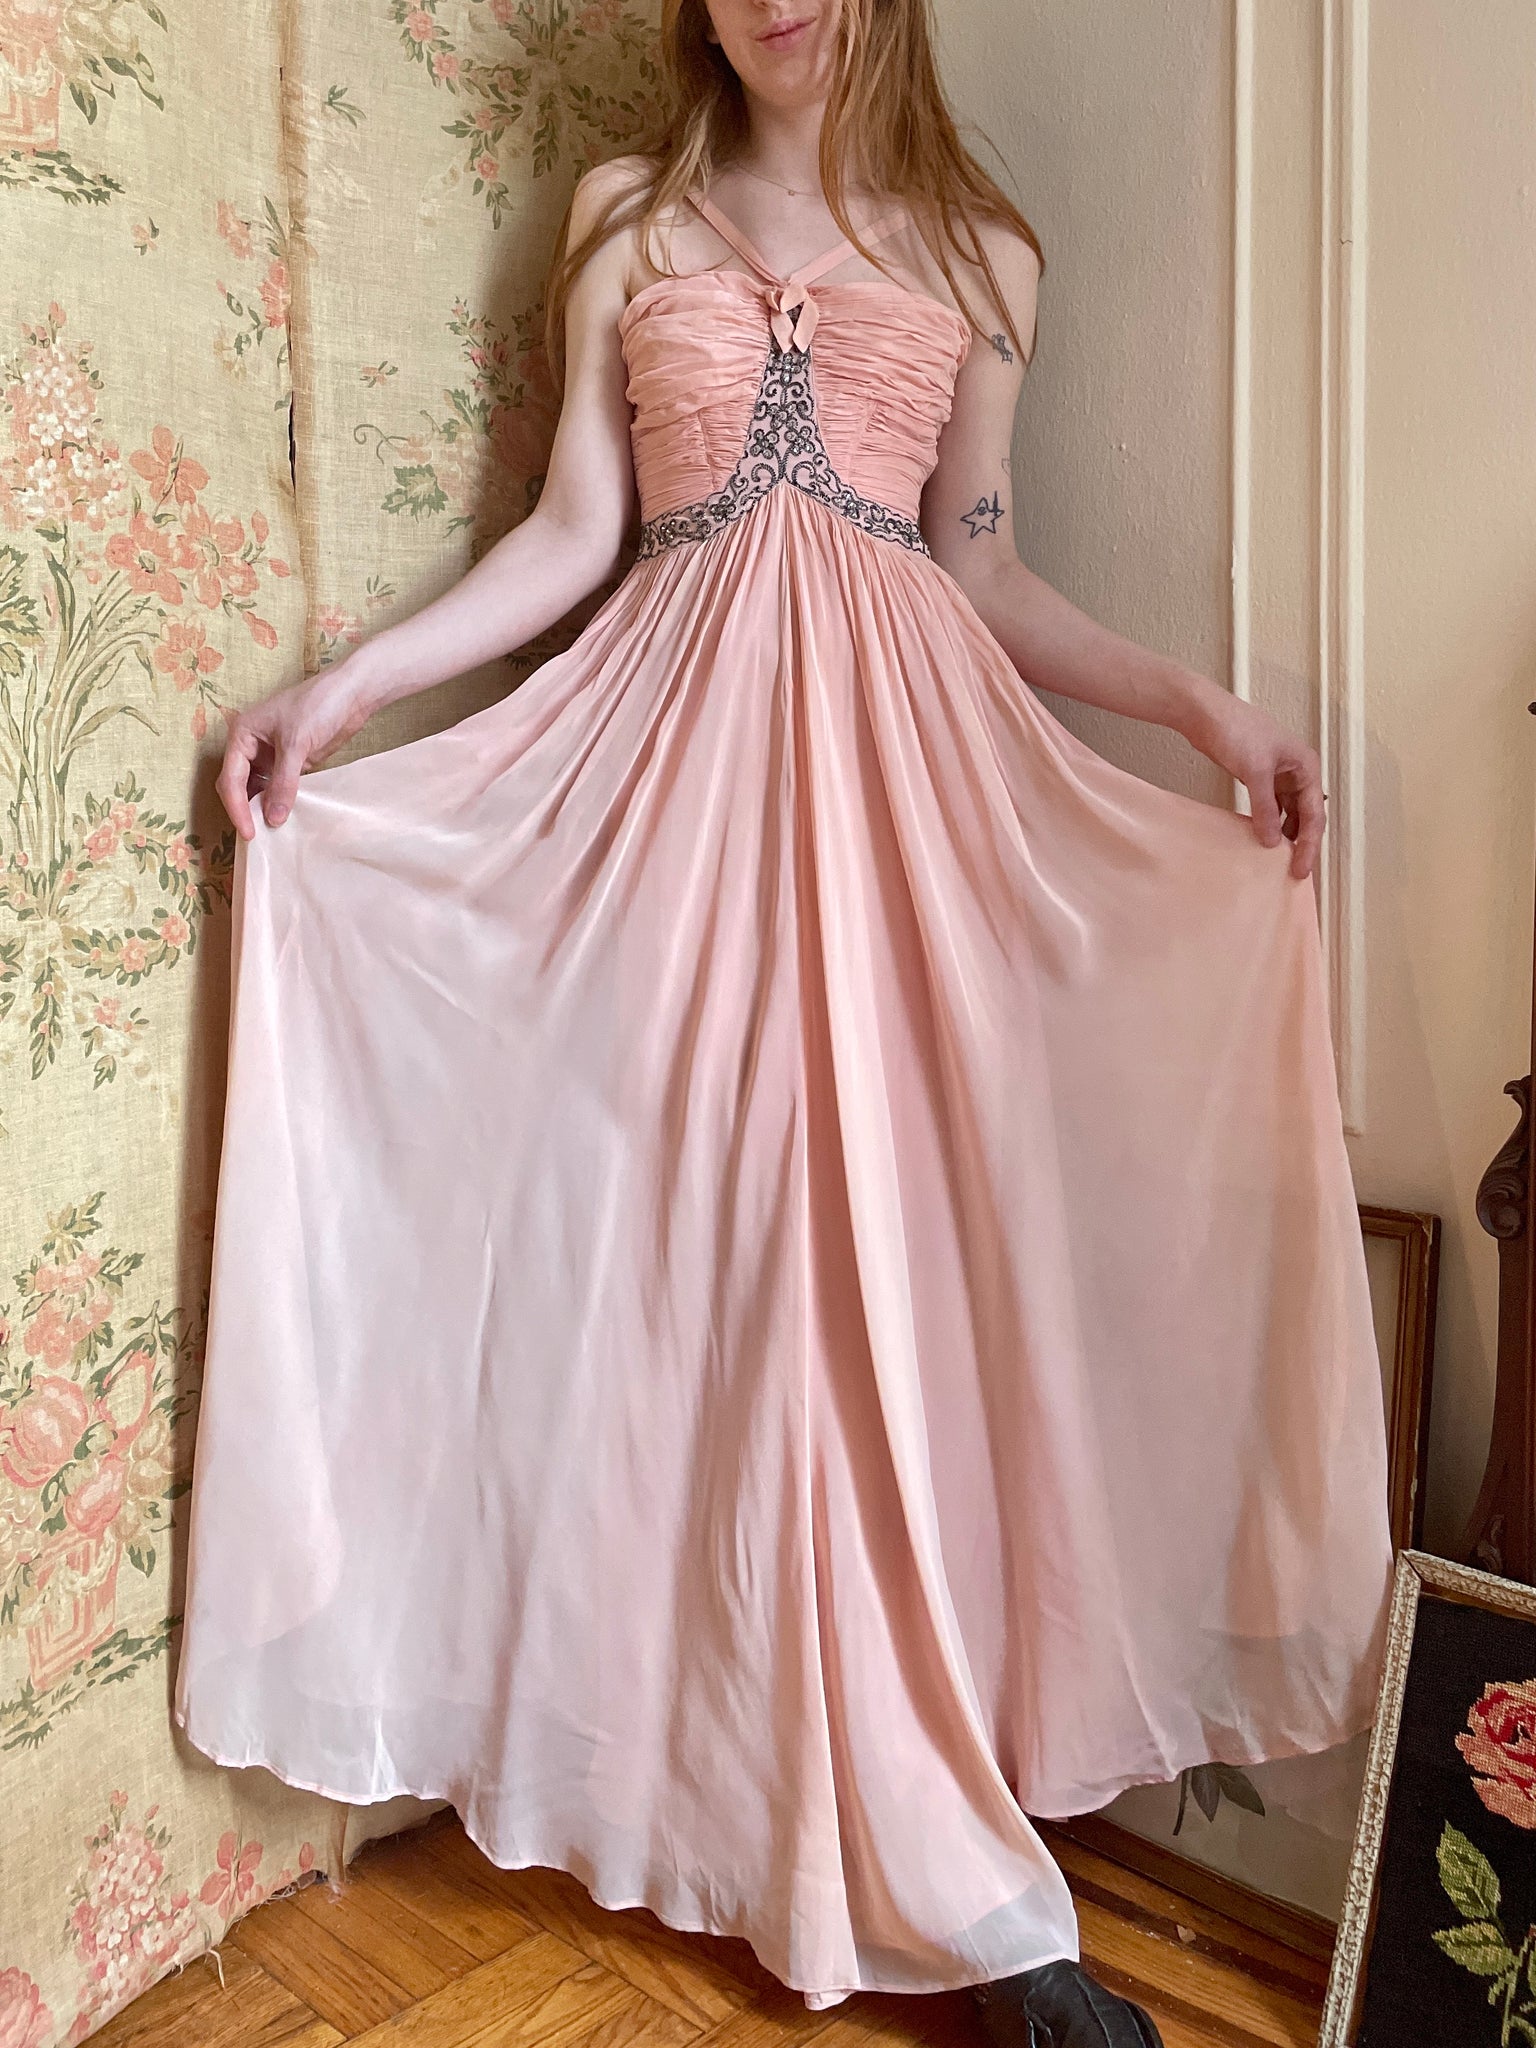 Vintage 1940's Light Pink Liquid Satin Gown, Dress With Gathered Bodice,  Size Large -  Hong Kong